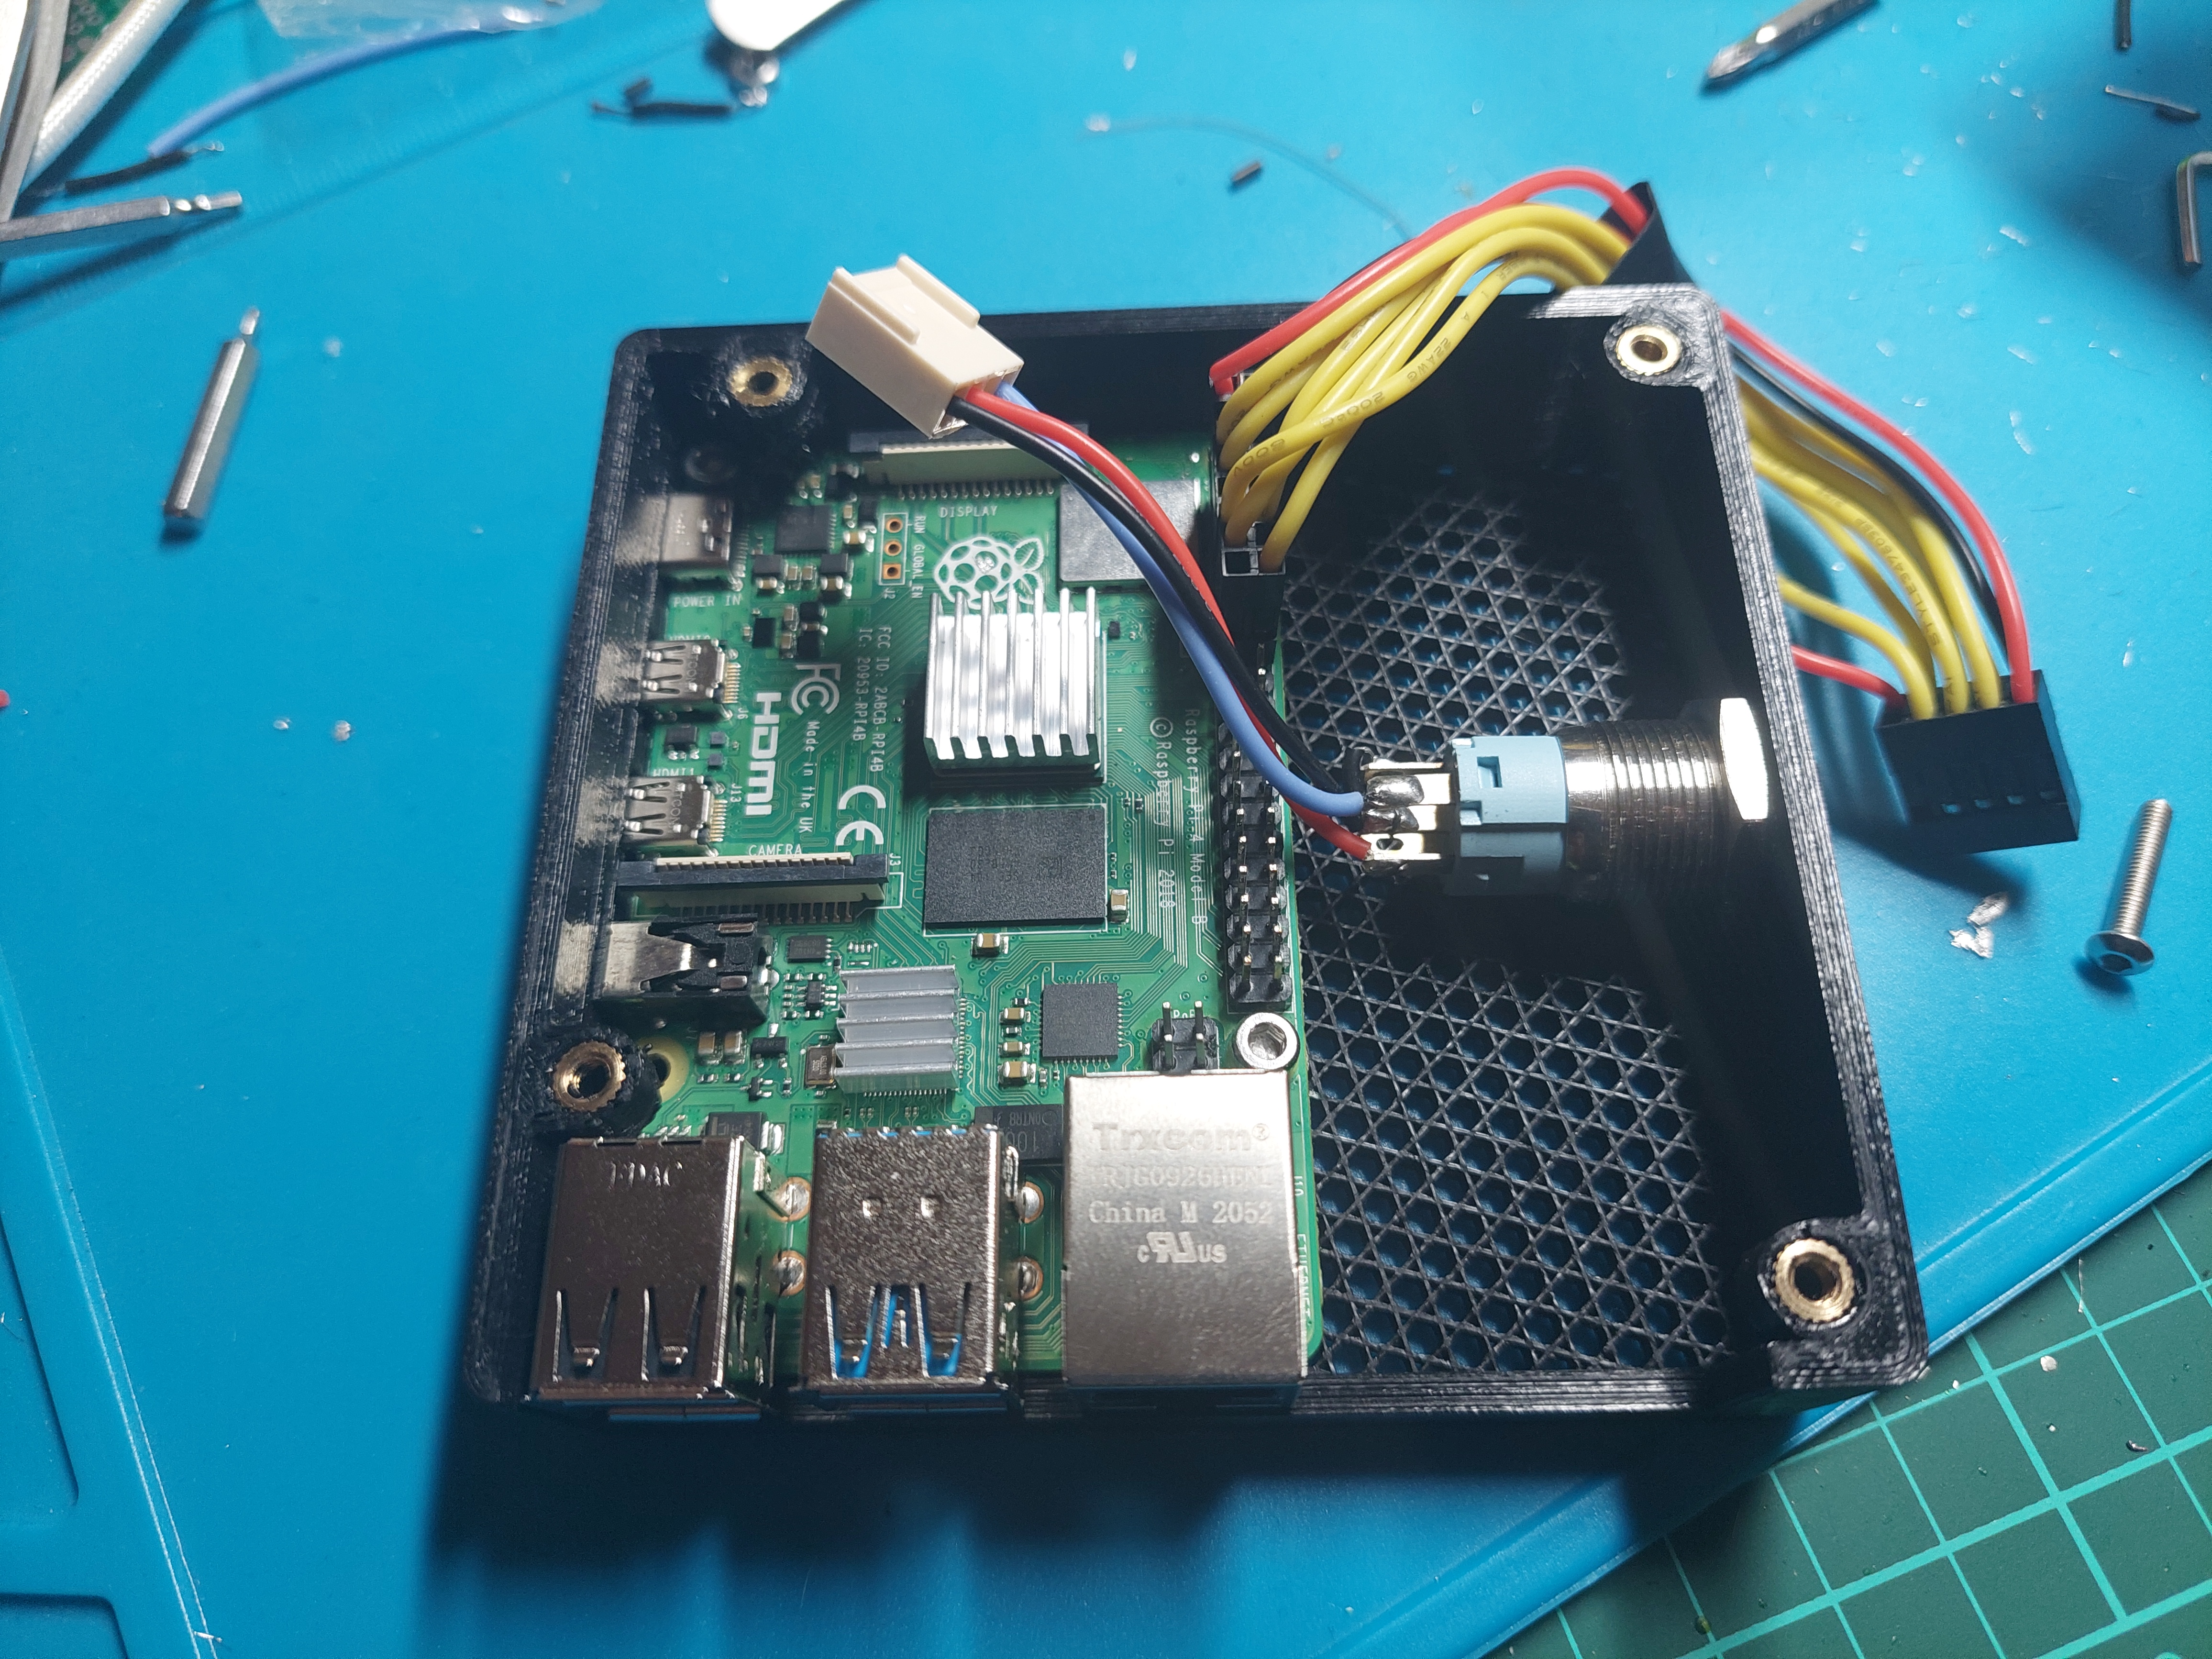 Bottom box with RPi installed